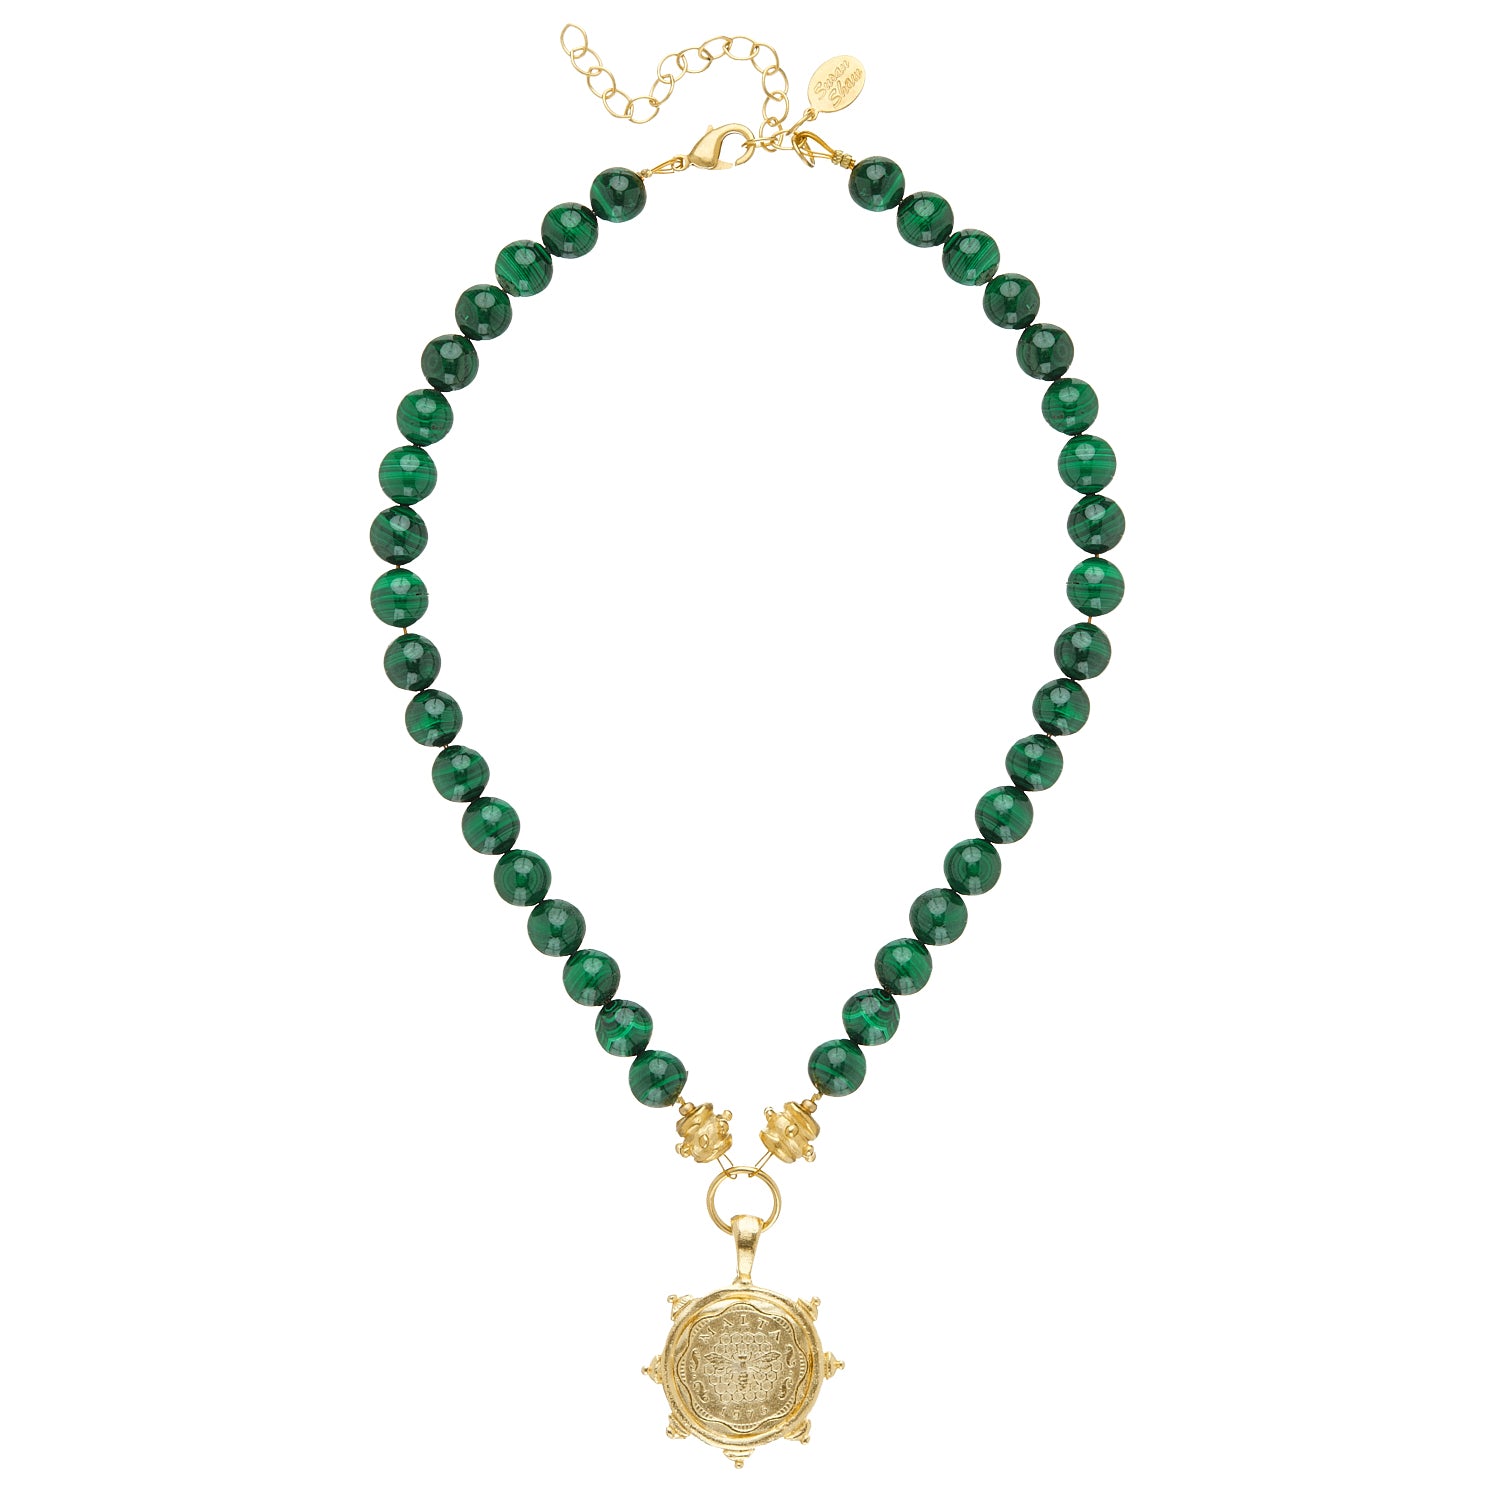 Add a touch of wanderlust and worldly charm to any ensemble with the Malachite Bee Coin Necklace. Boasting authentic Malachite beads in stunning shades of green, this necklace brings a touch of posh glamor and earthy vibes, making it an ideal accessory for a special event paired with your beloved pendant design. Handcrafted by Susan Shaw, this 24k gold plated necklace measures 16 inches with a 3 inch extender chain.